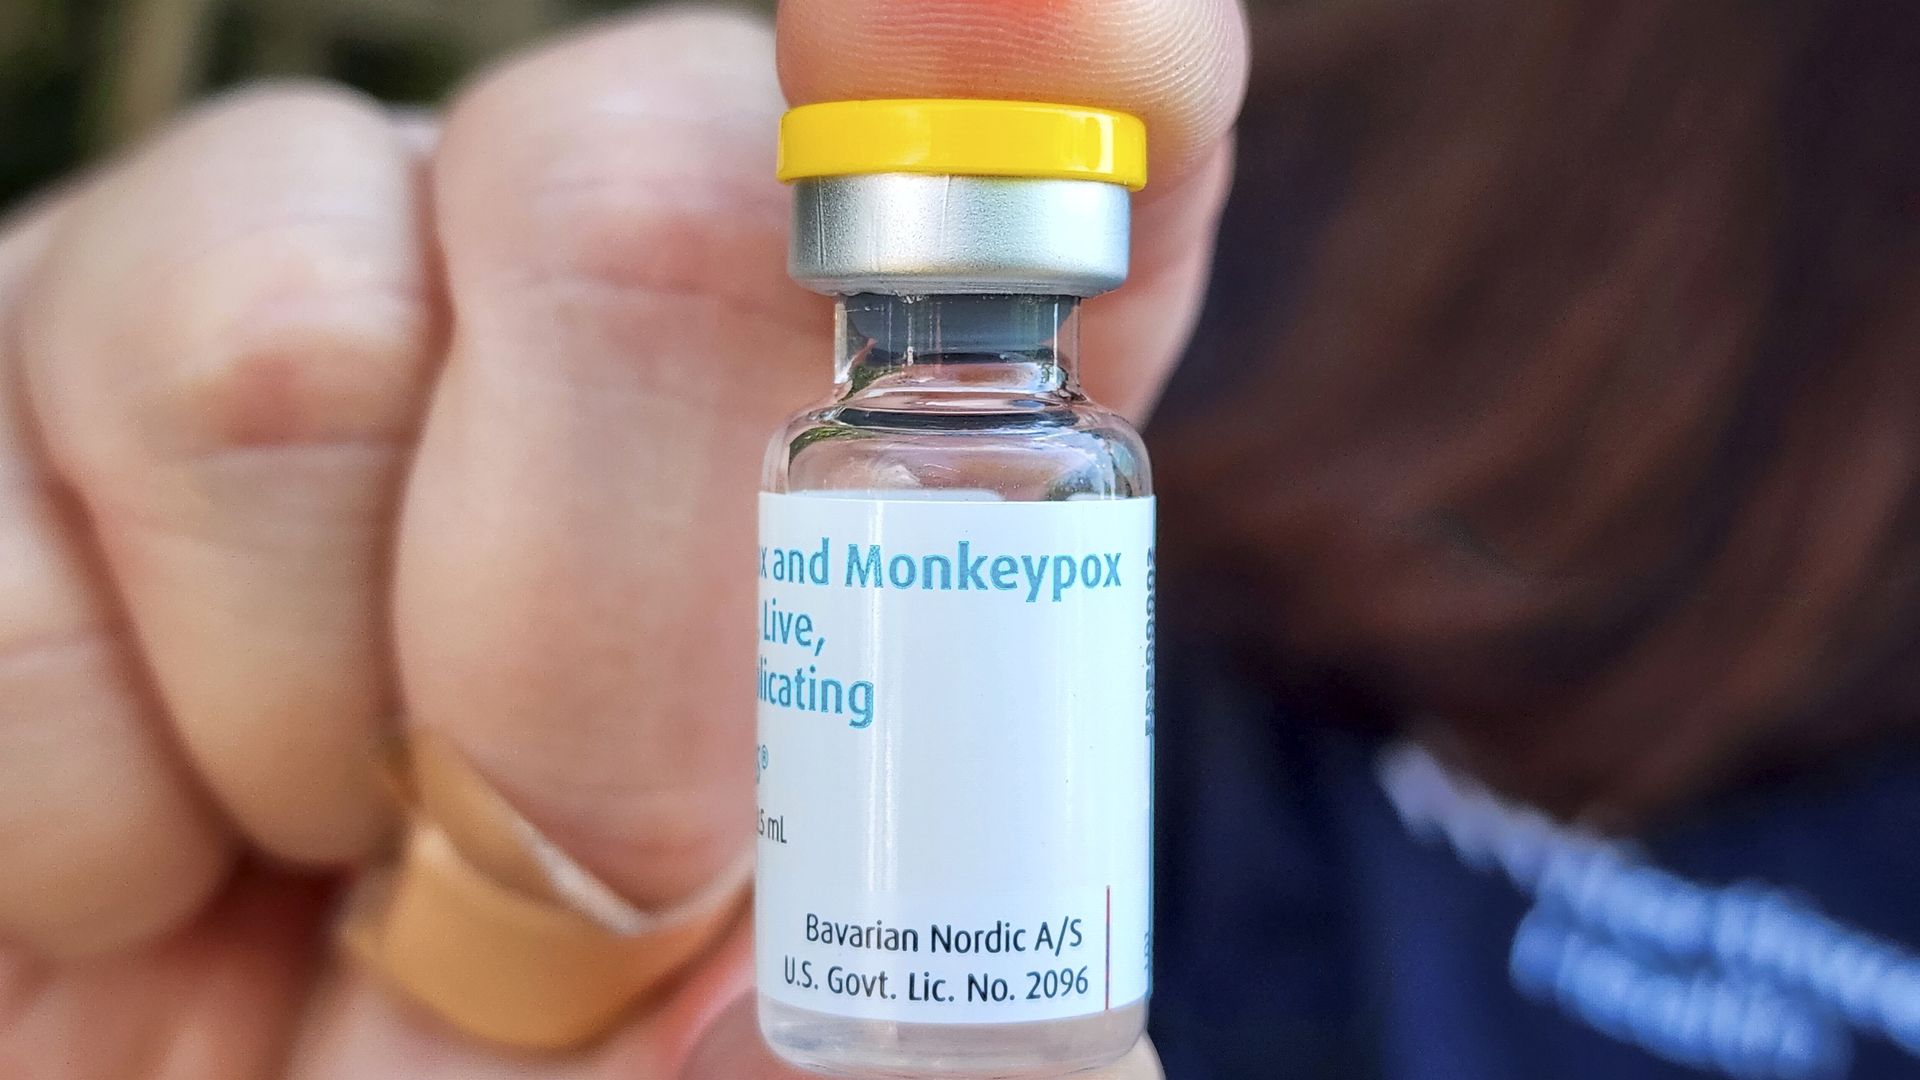 Monkeypox vaccine is displayed by a medical professional.